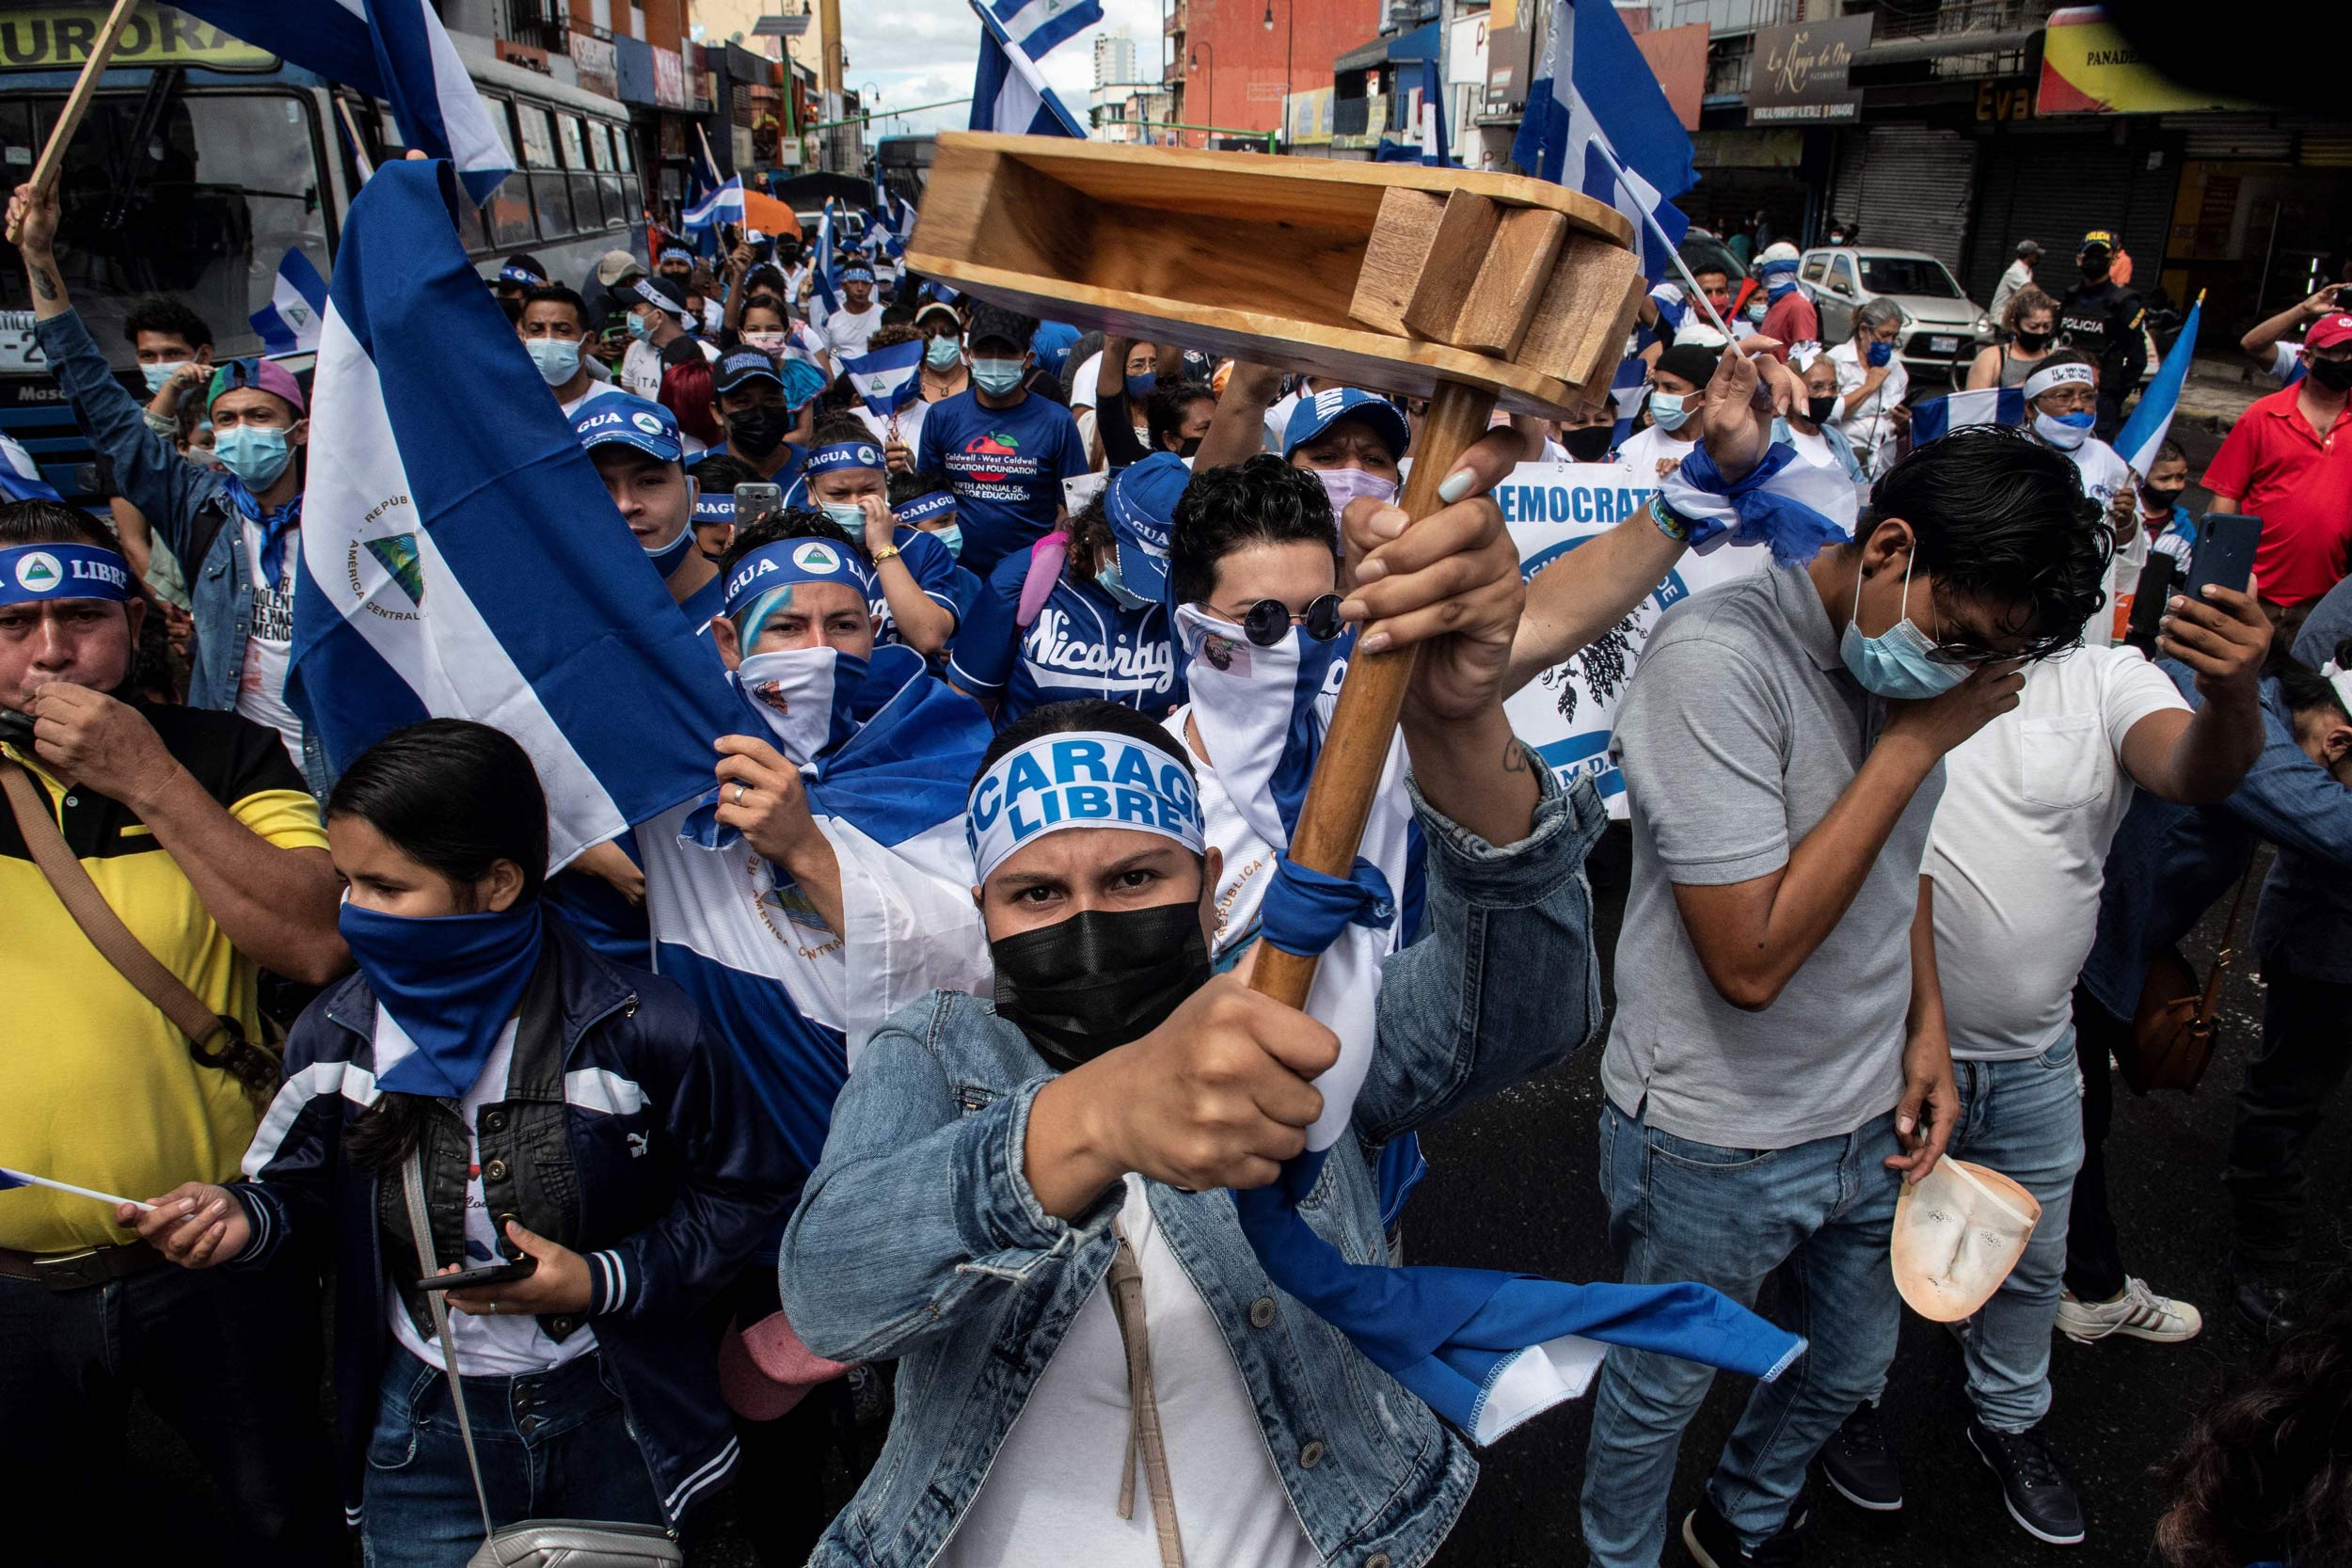 Nicaraguan citizens exiled in Costa Rica hold a demonstration against the elections in Nicaragua and President Daniel Ortega, in San Jose, Costa Rica, on November 7.